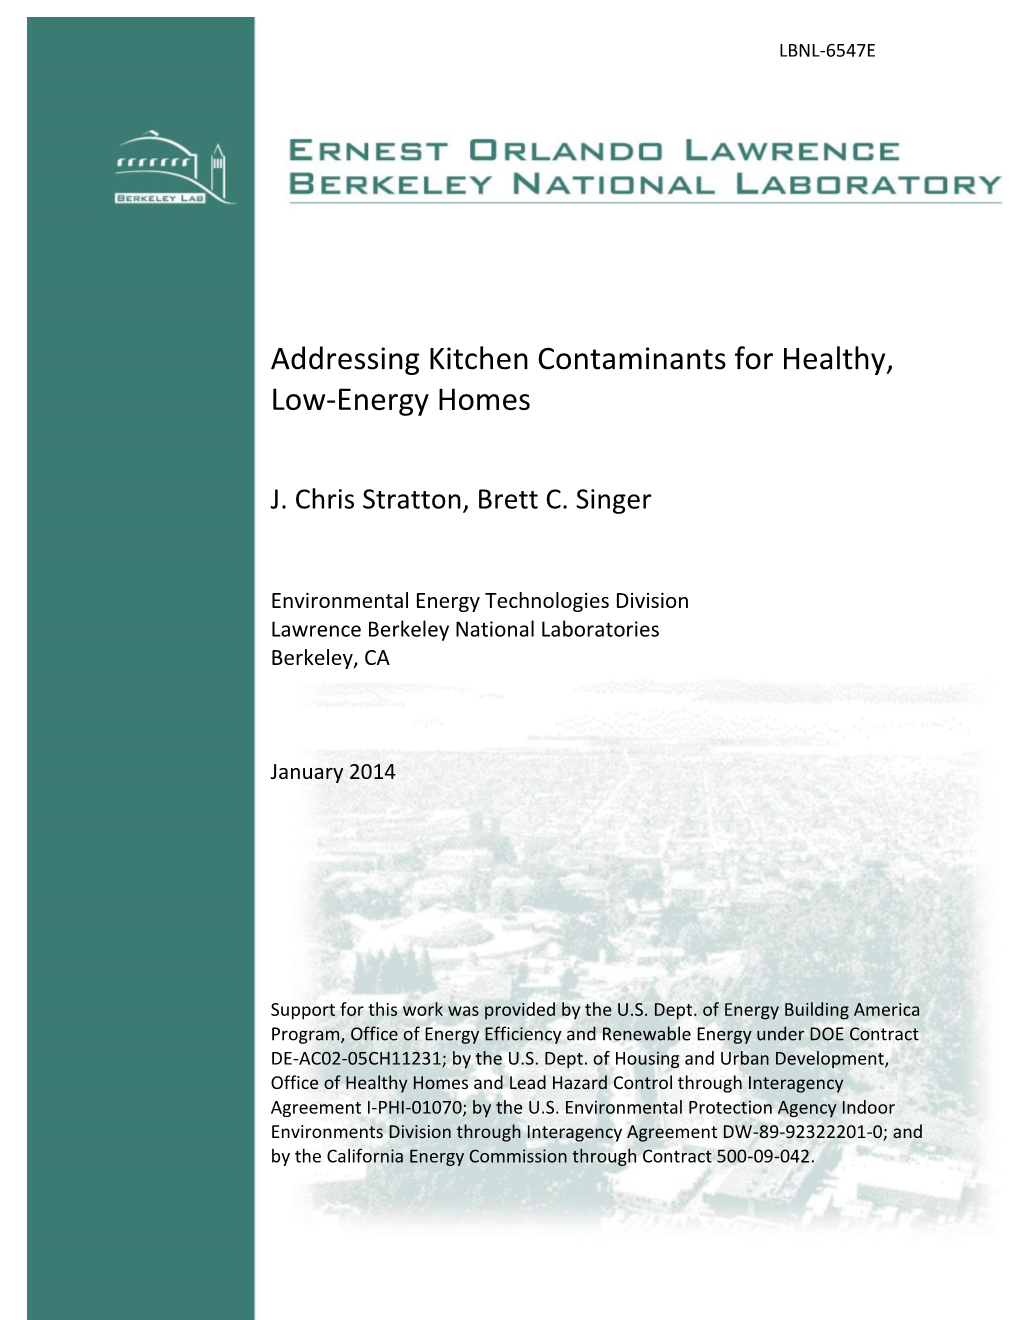 Addressing Kitchen Contaminants for Healthy, Low-Energy Homes